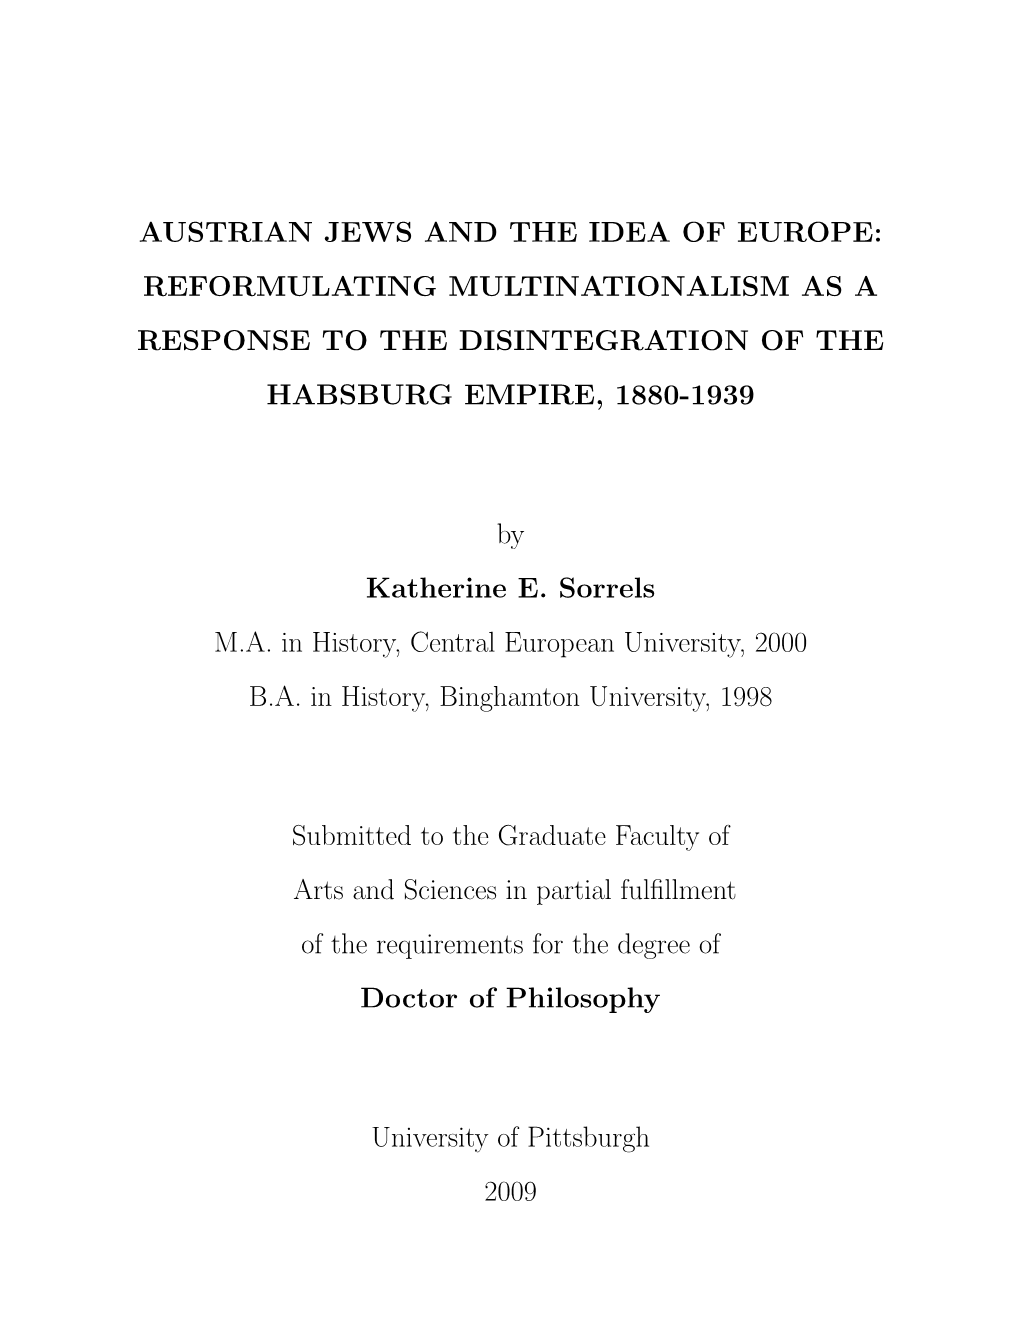 Austrian Jews and the Idea of Europe: Reformulating Multinationalism As a Response to the Disintegration of the Habsburg Empire, 1880-1939